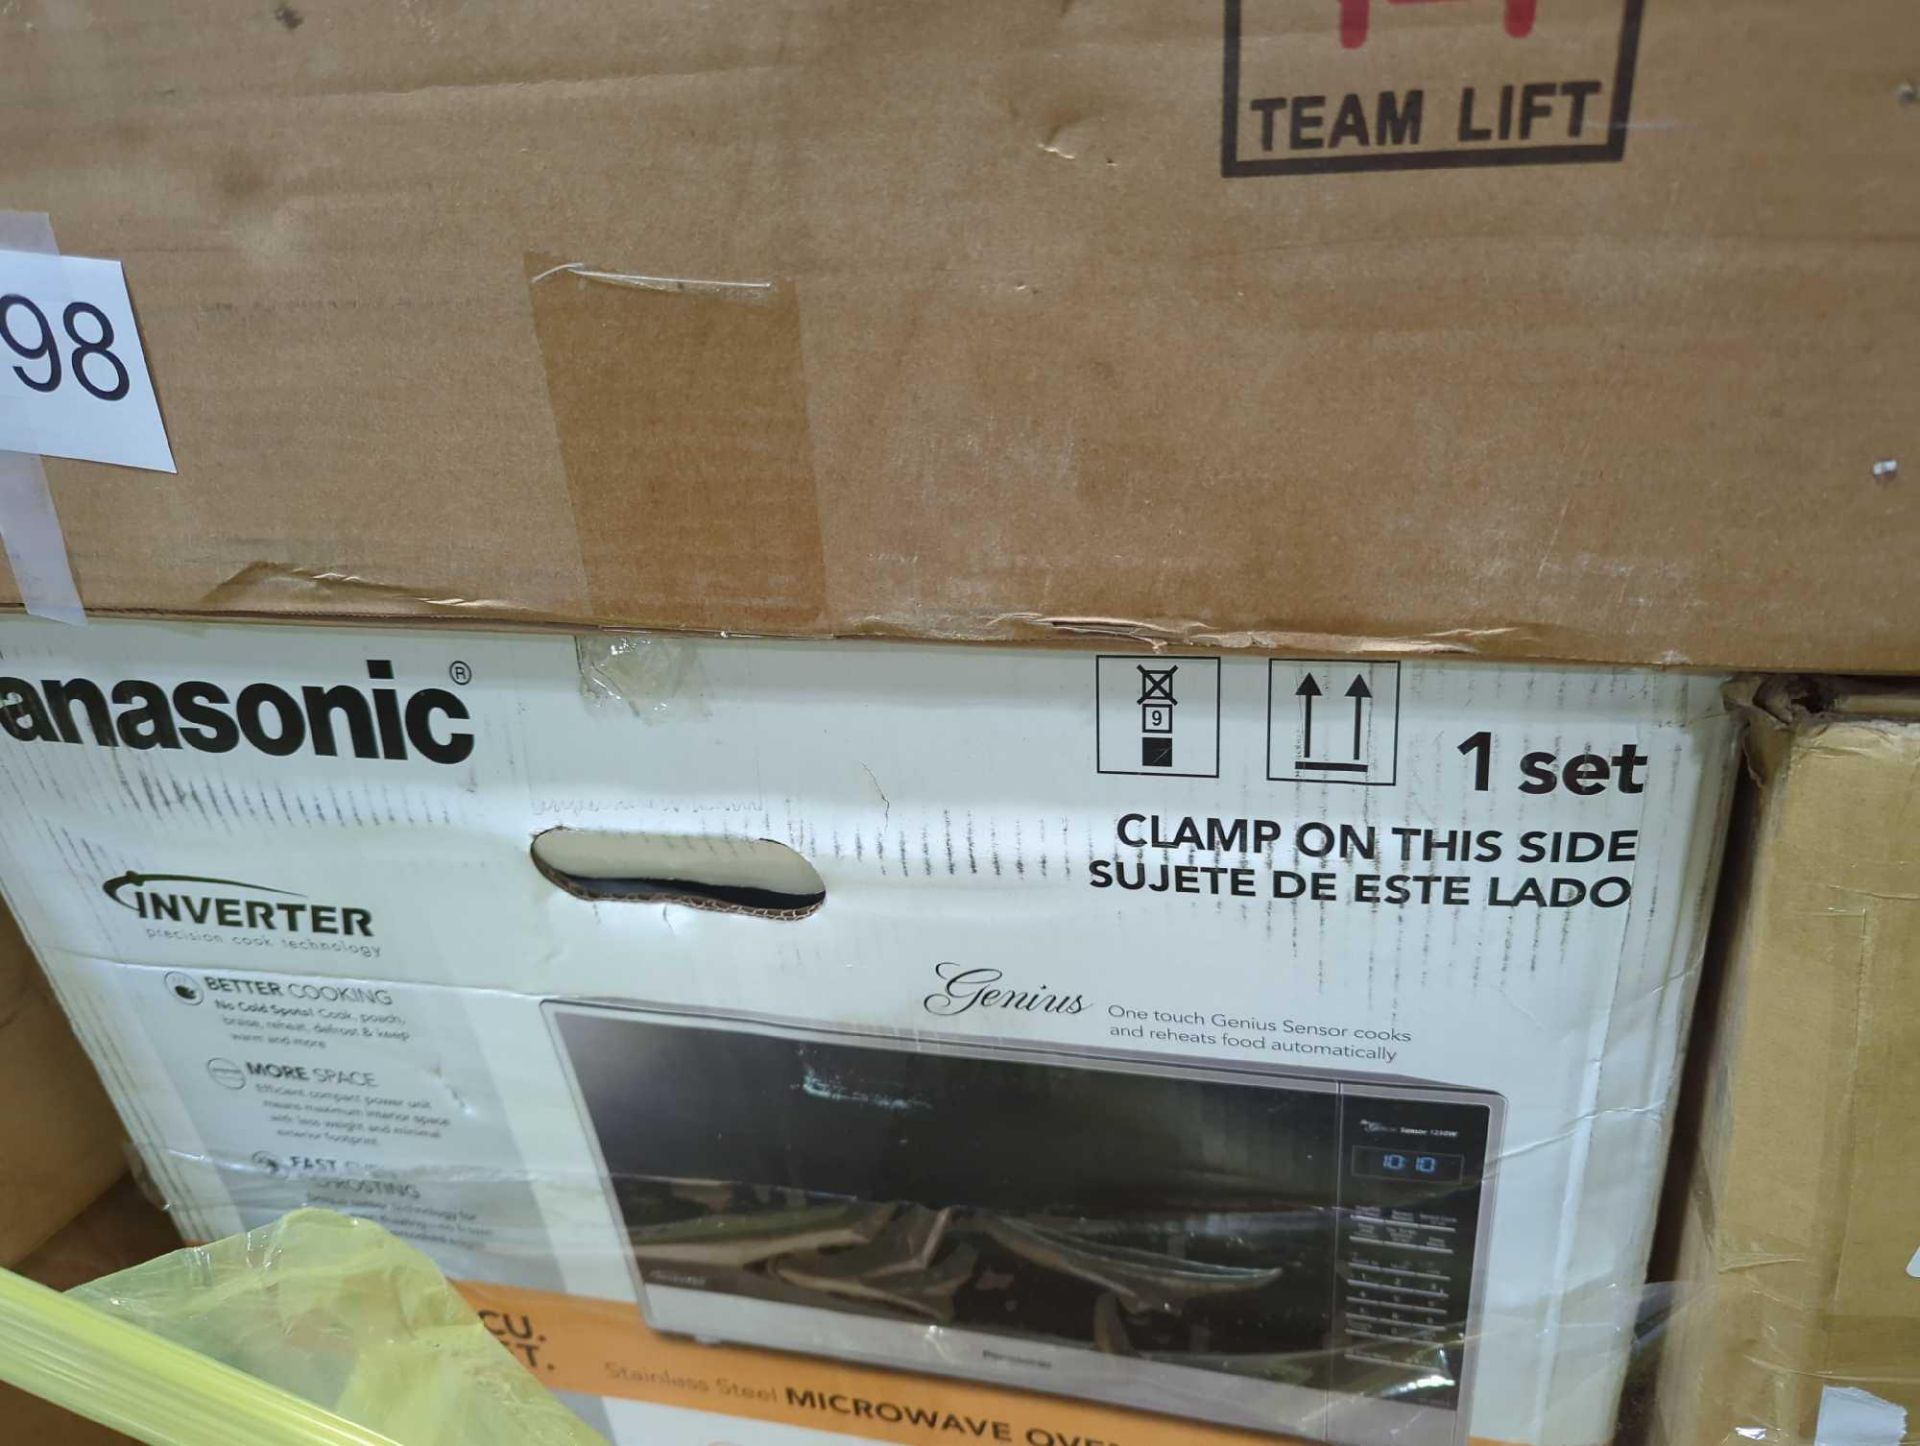 Panasonic microwave, Samsonite product, miscellaneous furniture items, vacuum cleaner, wire shelving - Image 7 of 8